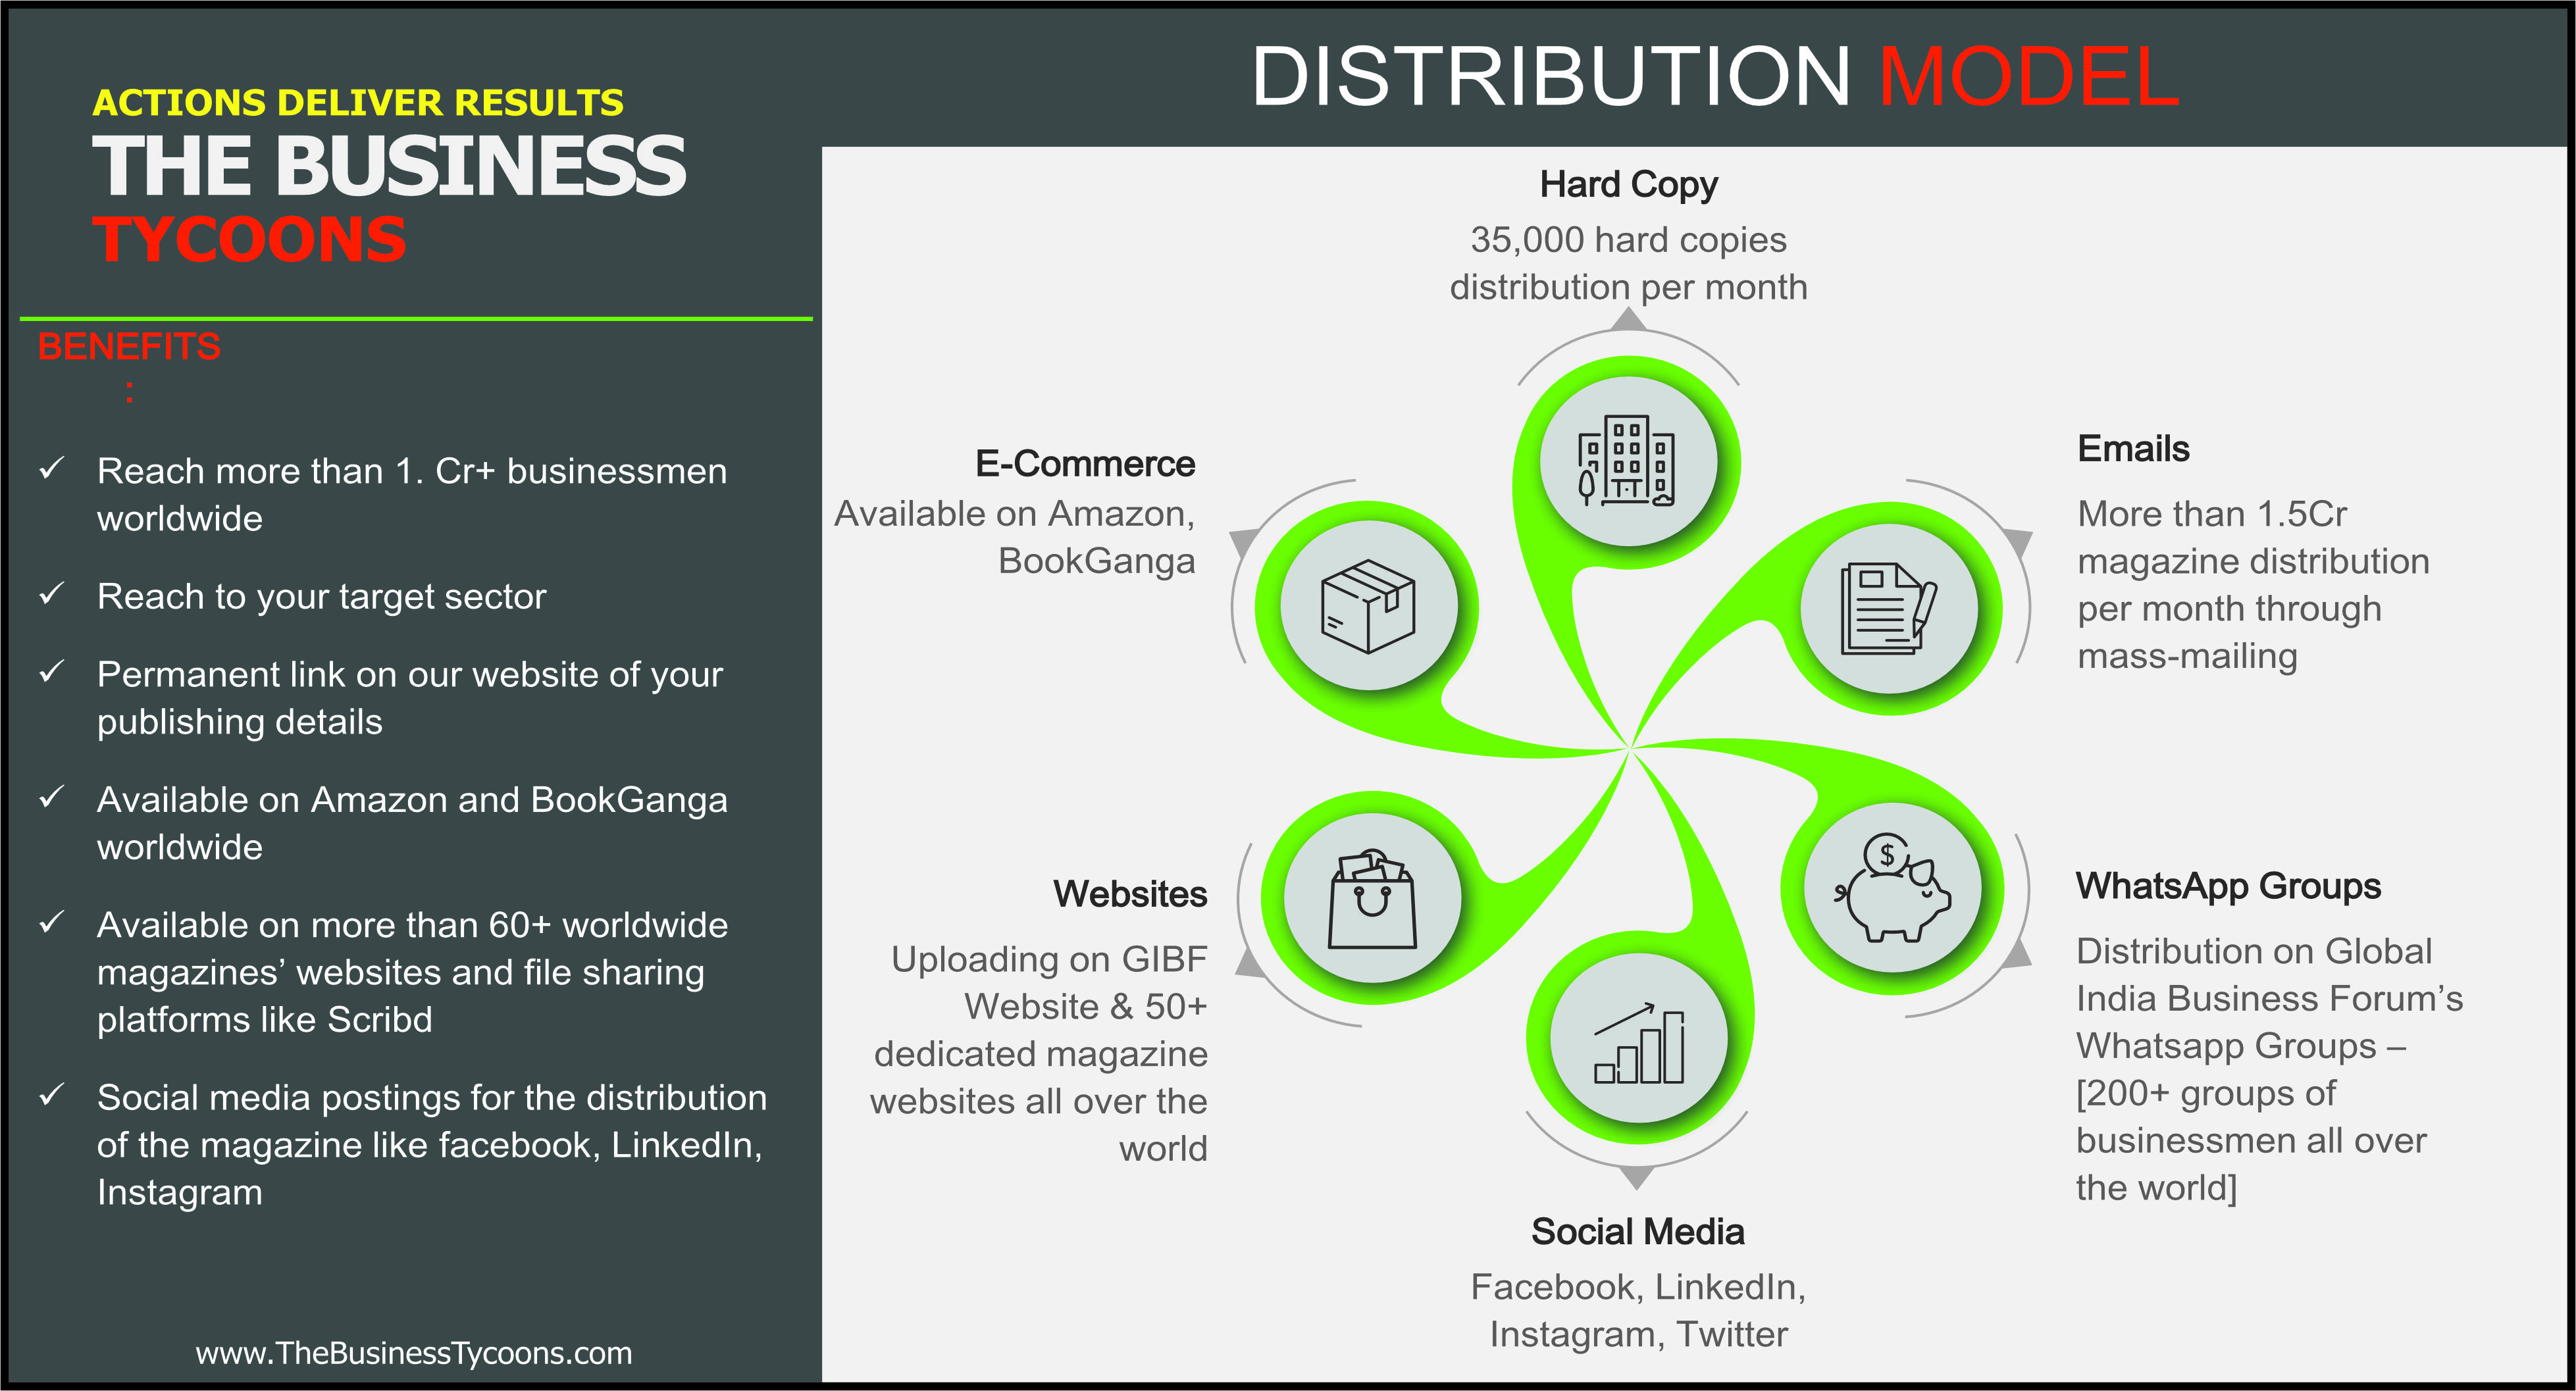 The Business Tycoons - Distribution Model